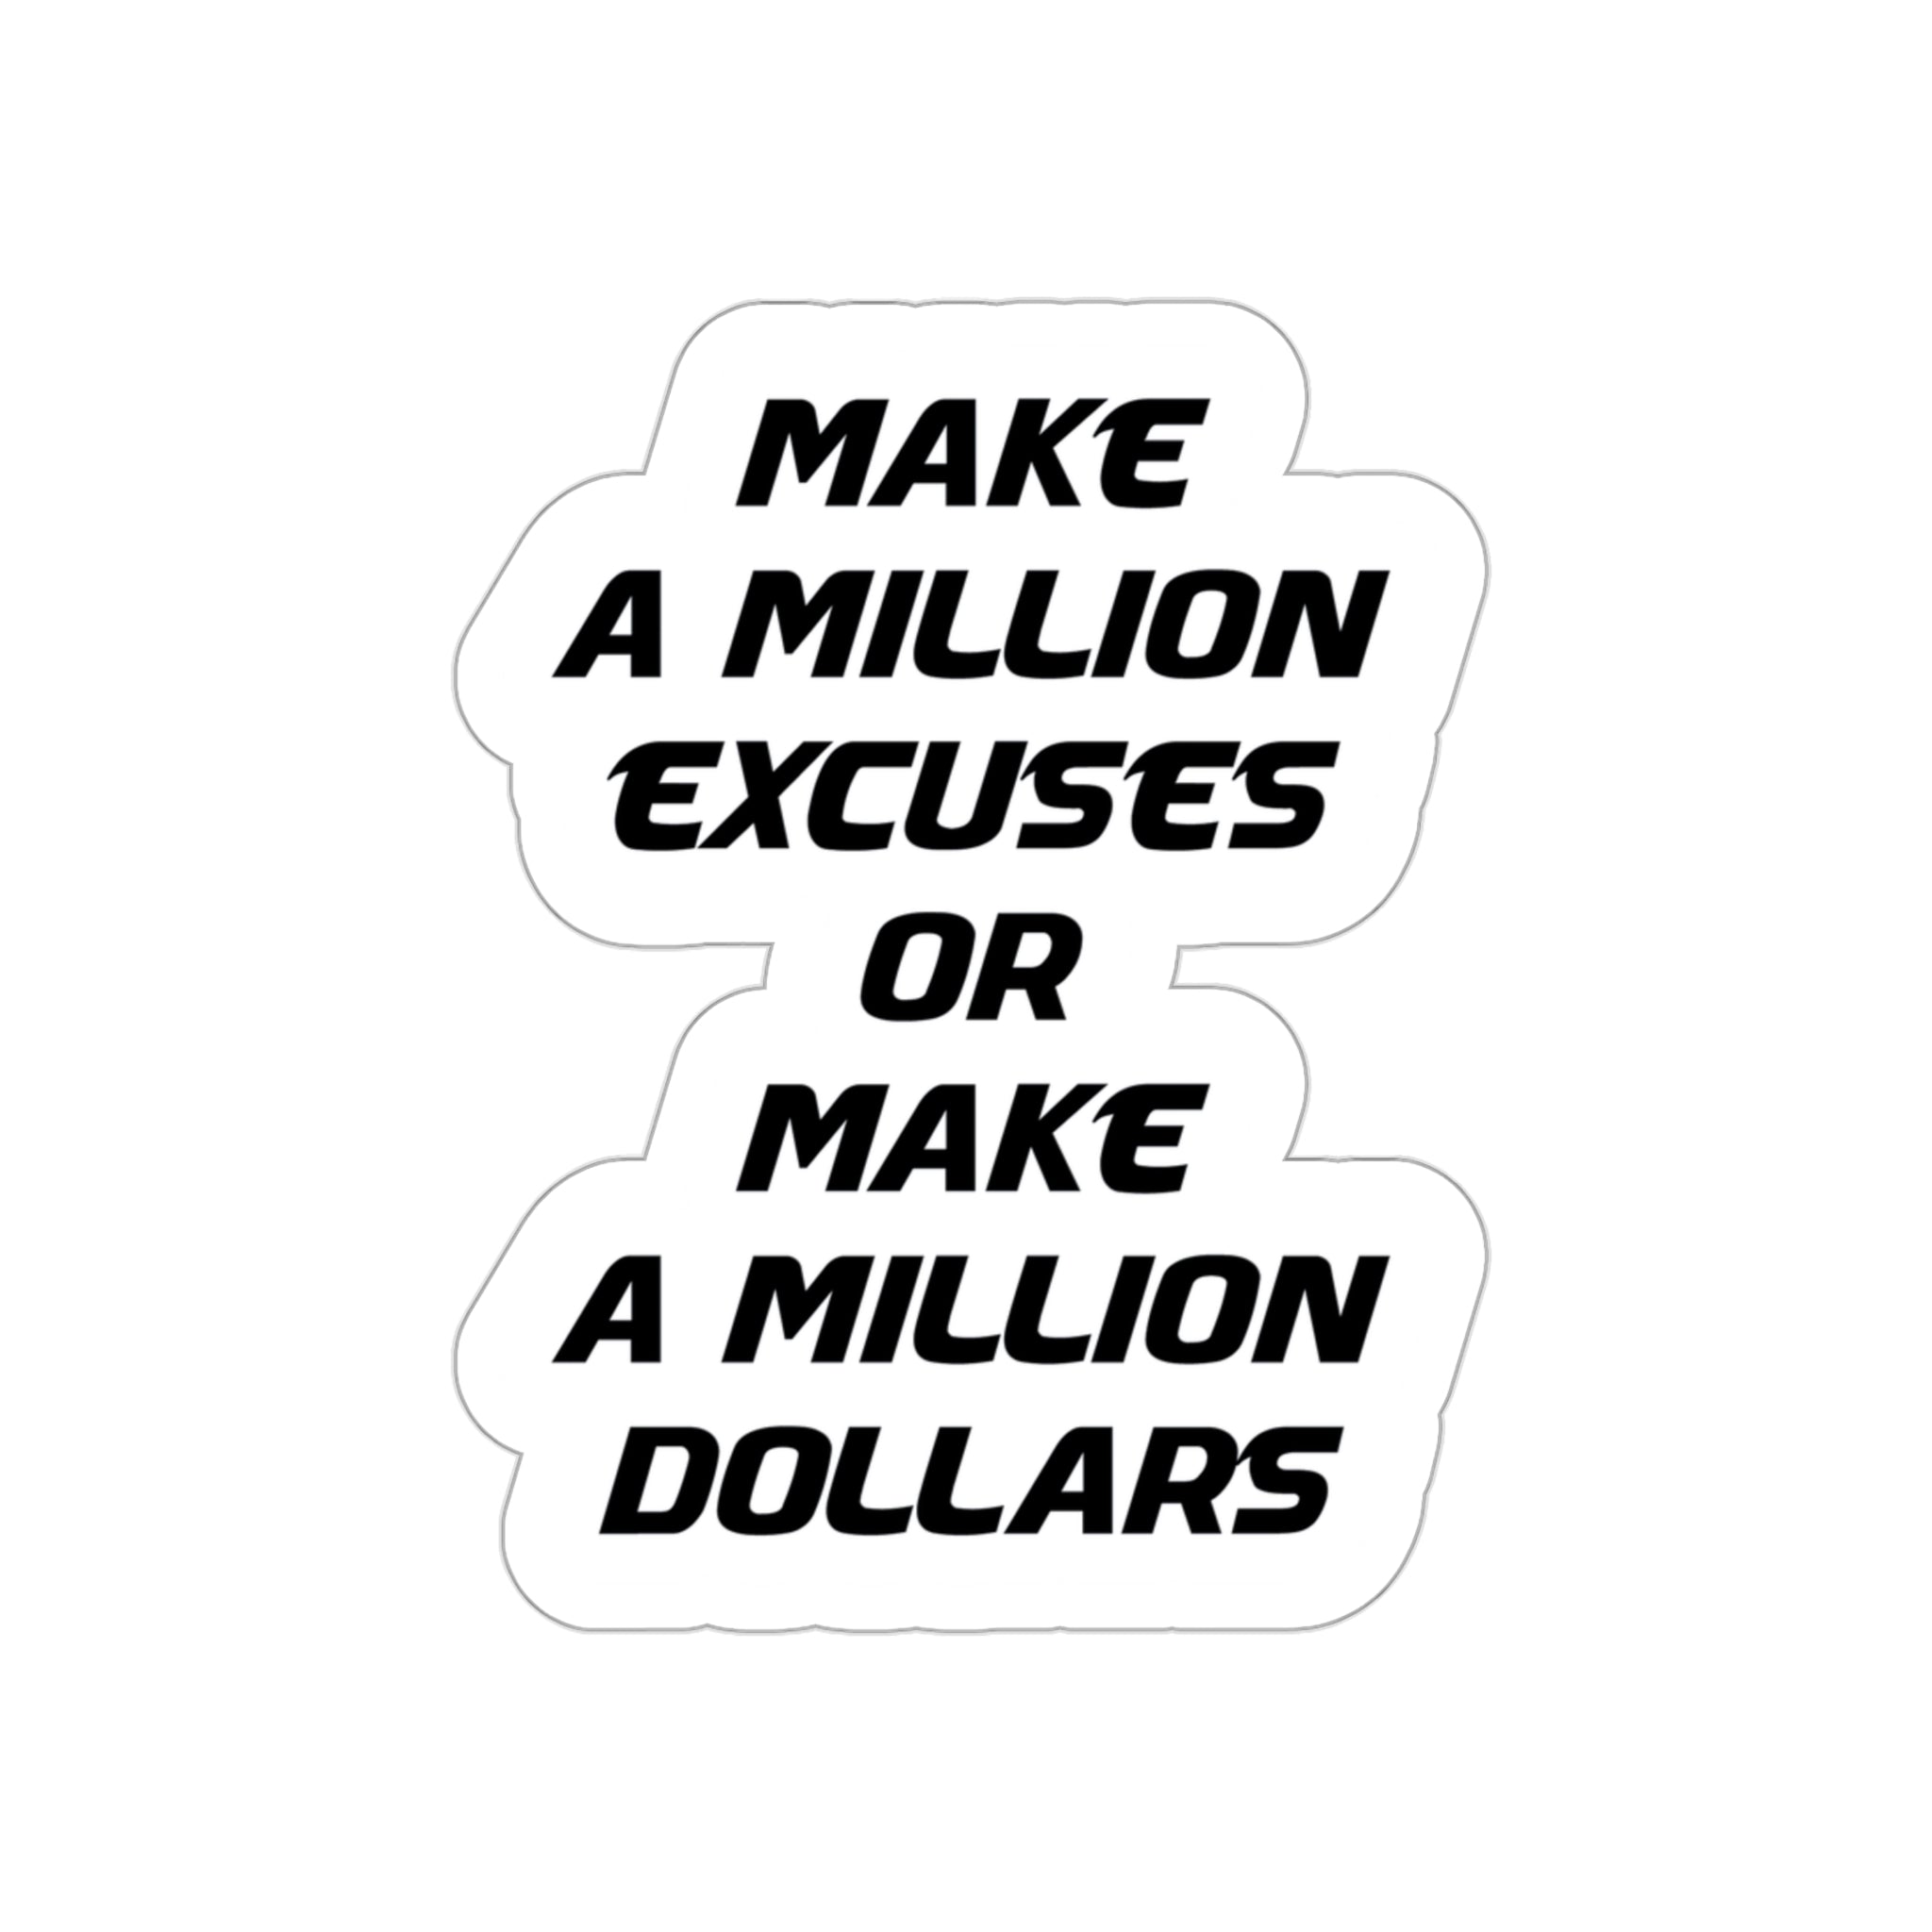 Make a million excuses or make a million dollars sticker | Shop motivational money quotes #size_3x3-inches